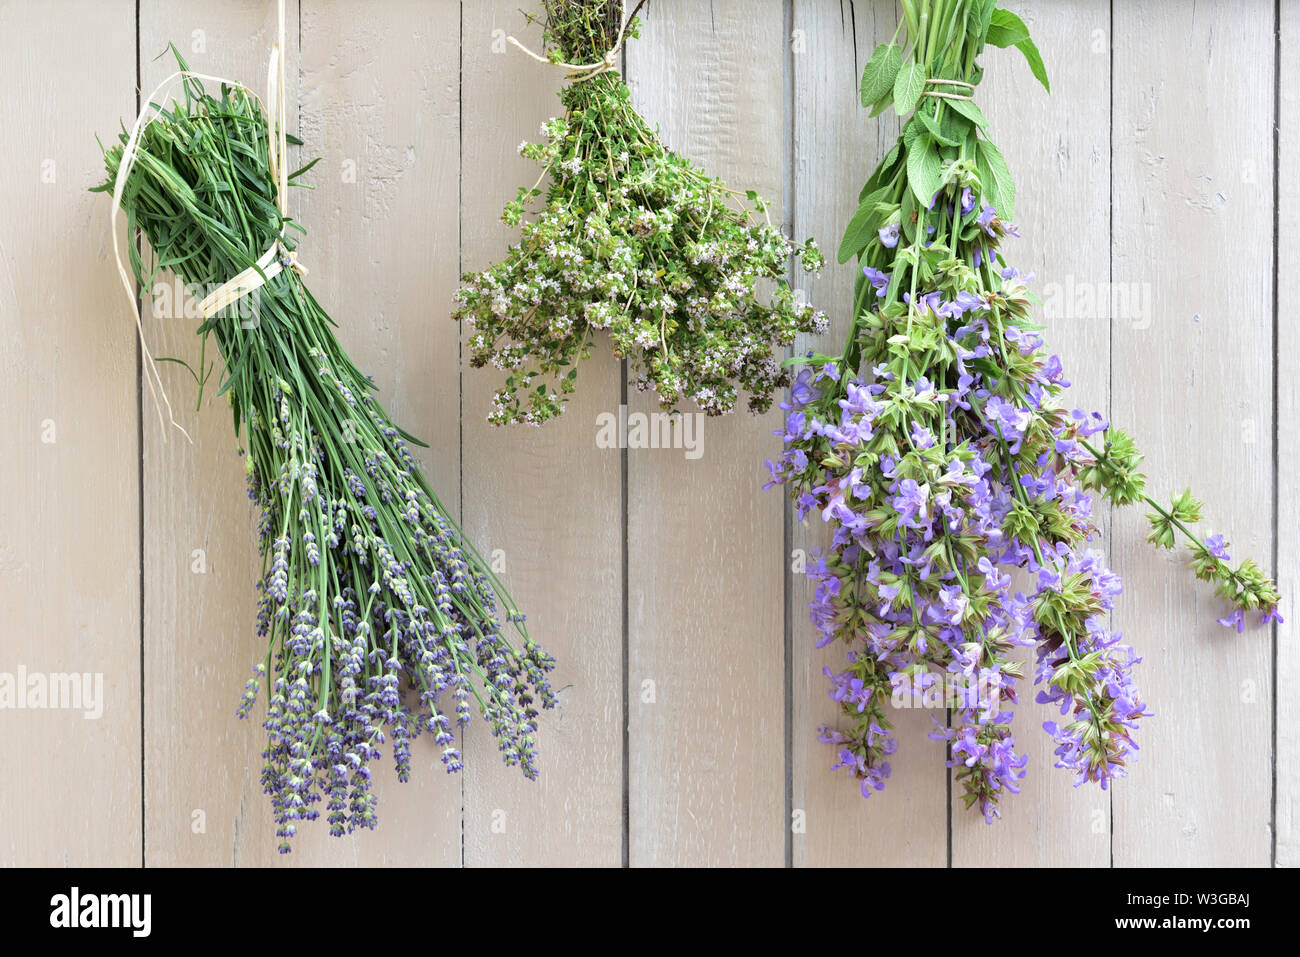 fresh, bouquet, lavender, smell, summer, dry, outdoor, romantic, love, season, background, text field, germany, europe, wild, wild plant, plant, herb, Stock Photo